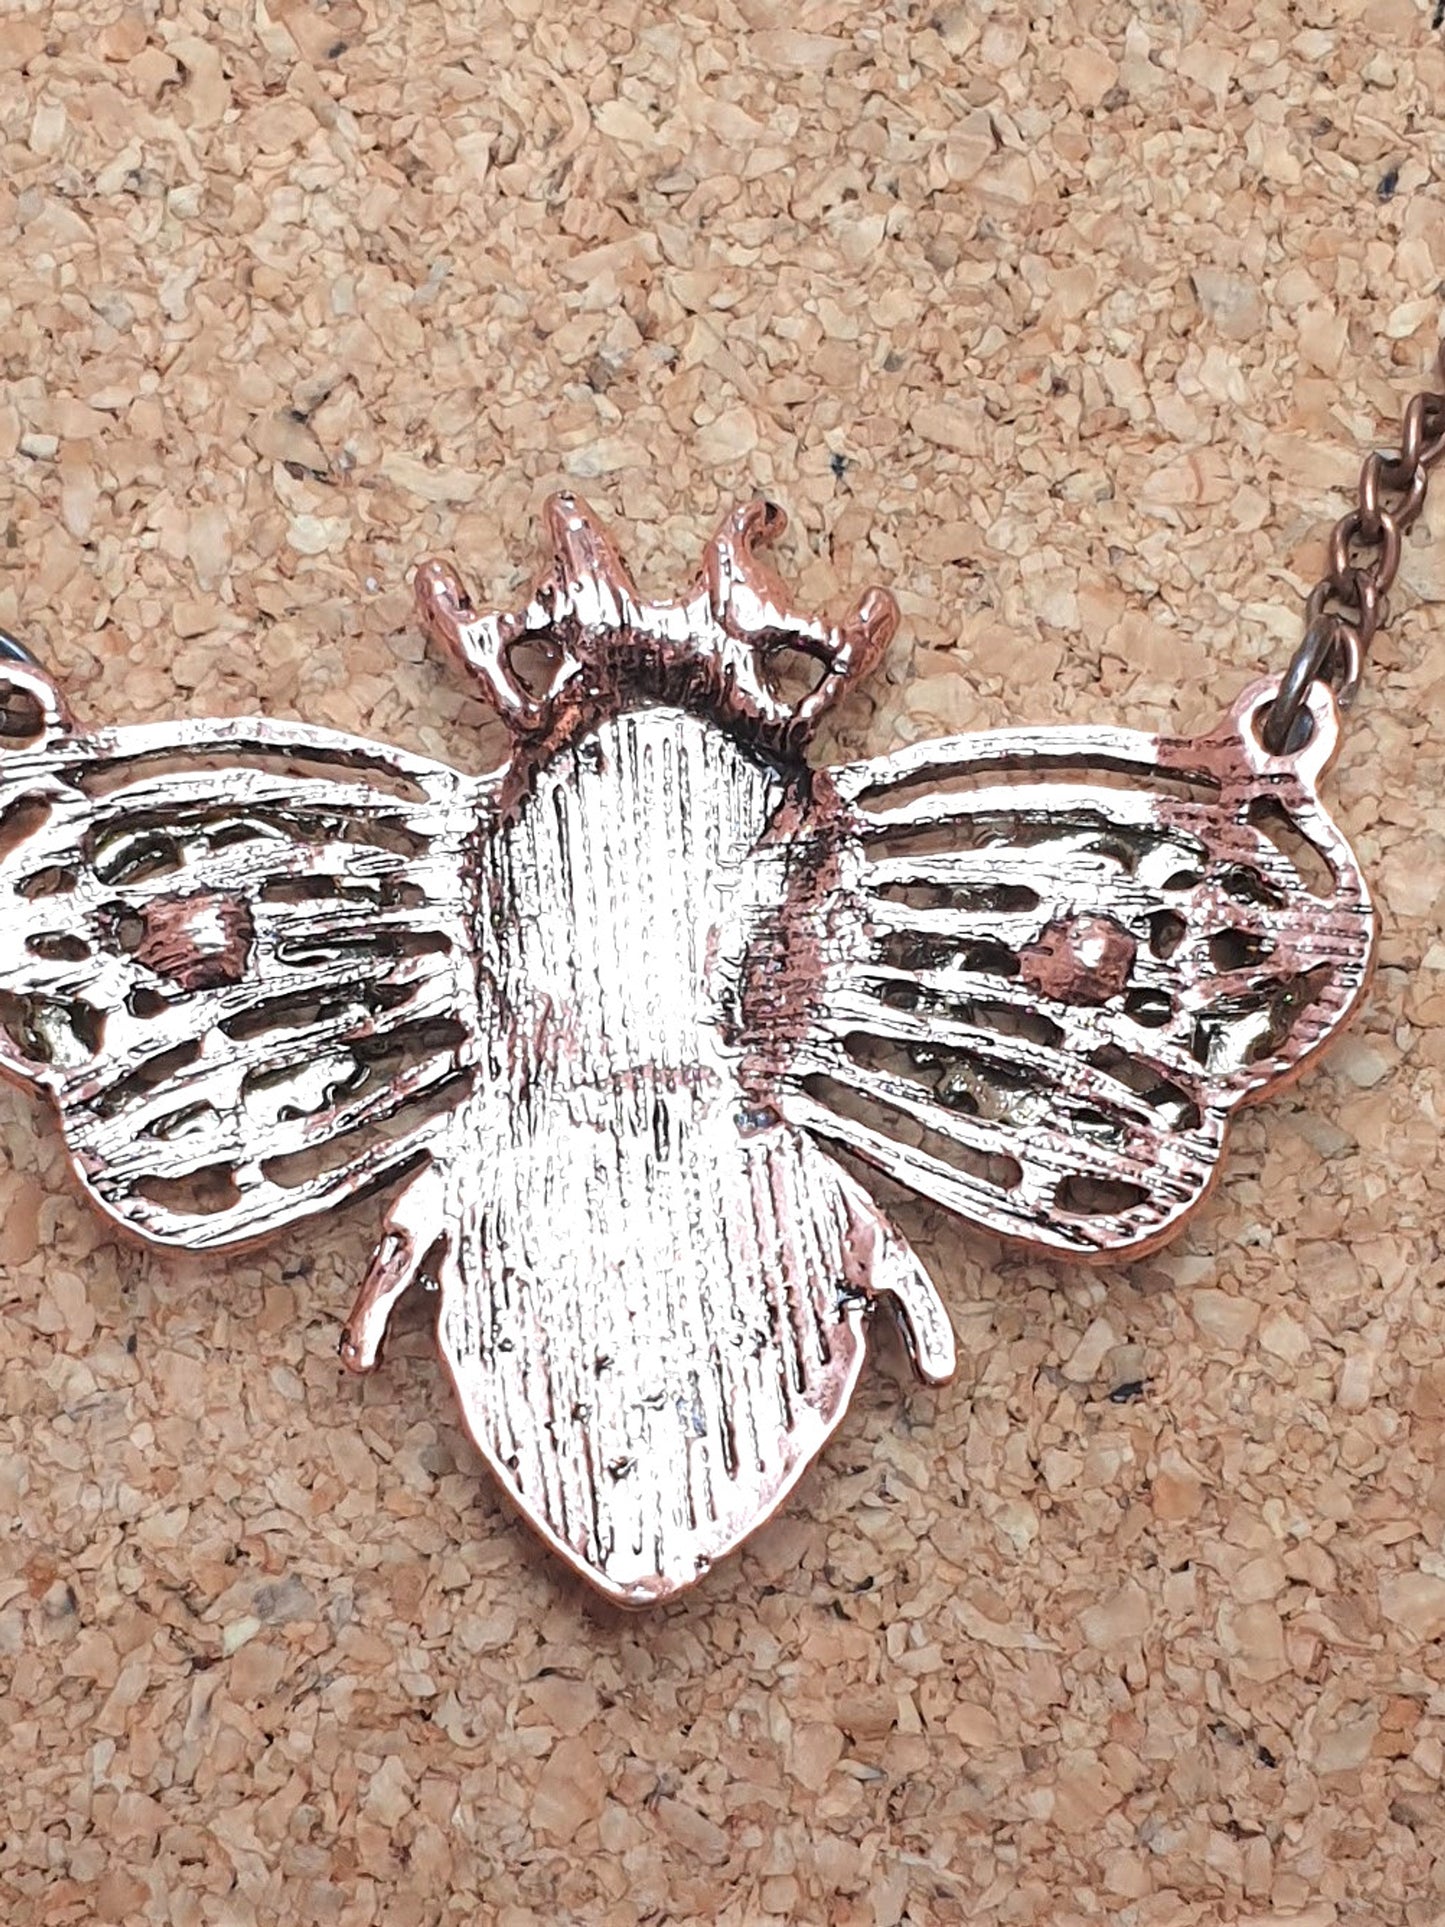 Steampunk Bee Necklace